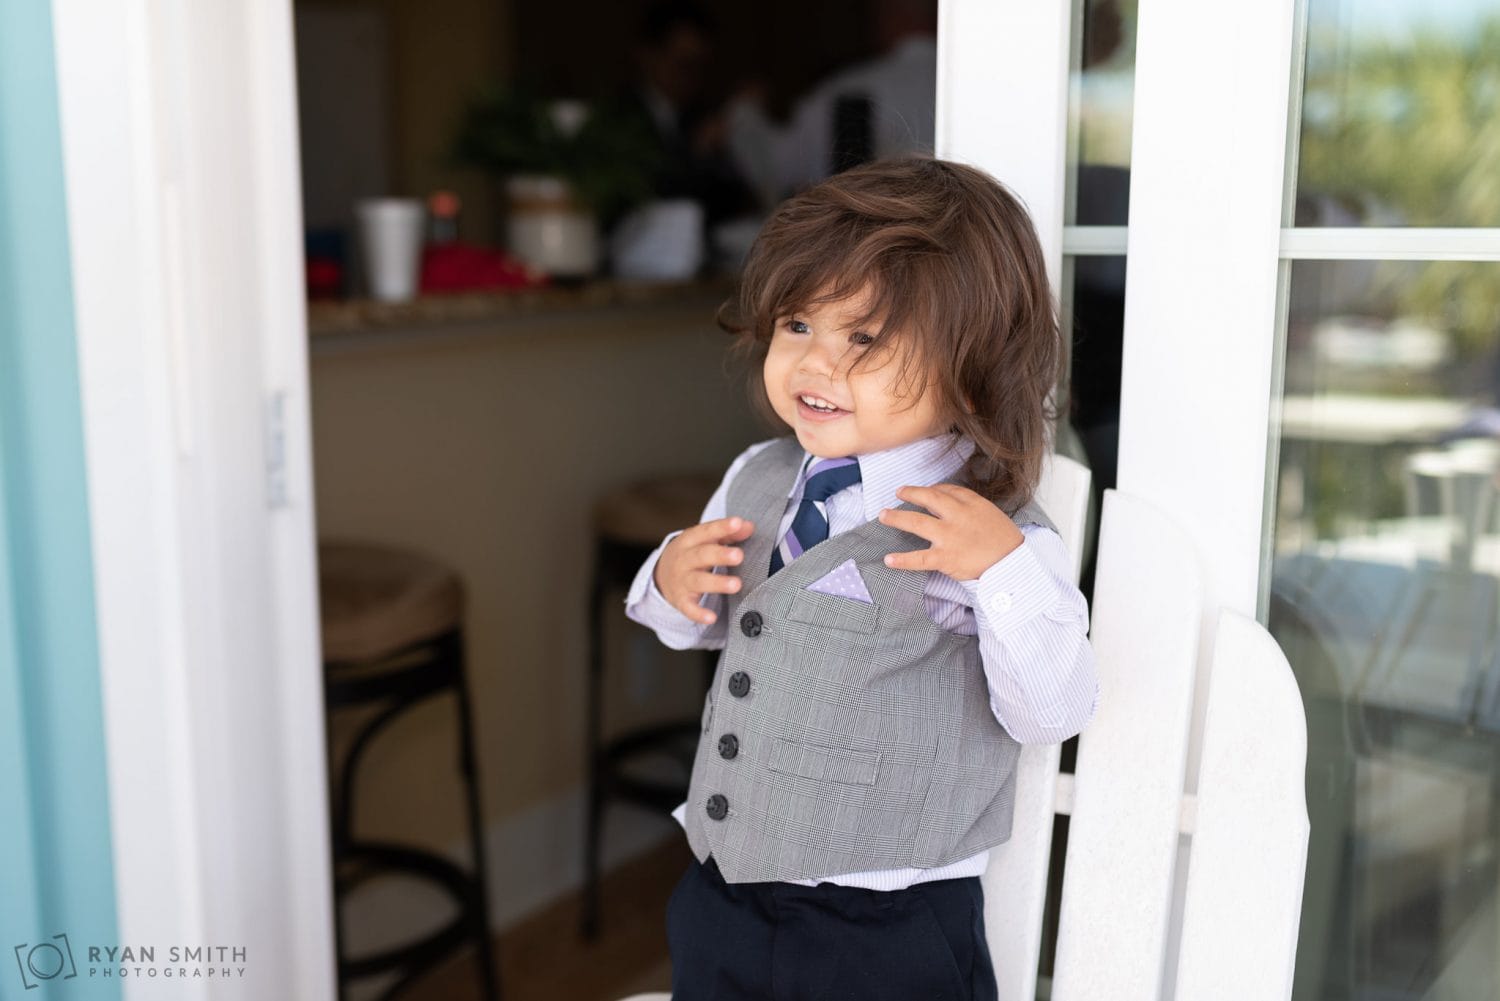 Baby boy dressed for parent's wedding 21 Main Events at North Beach